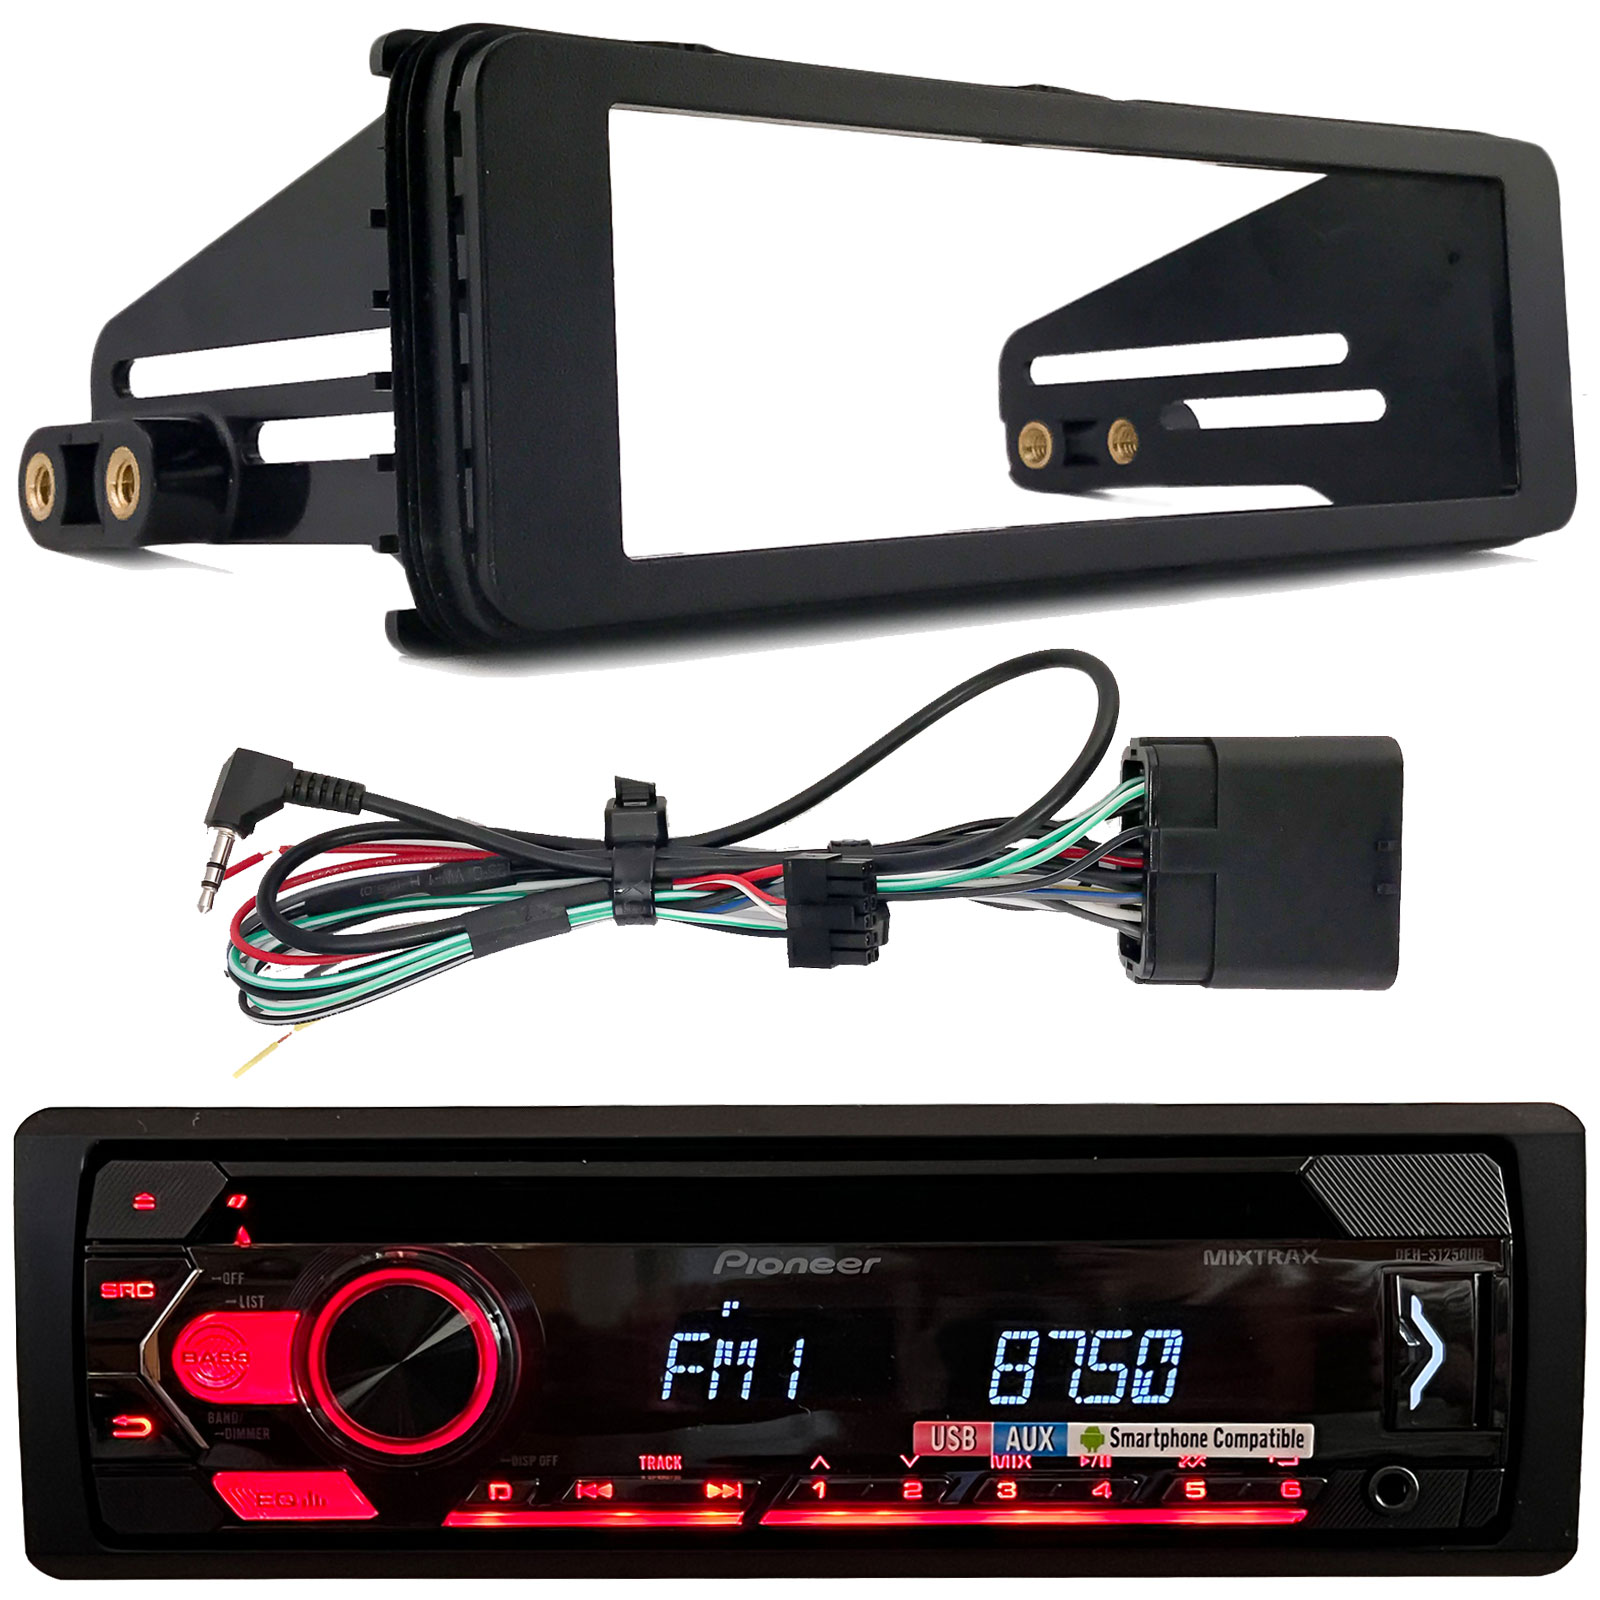 Pioneer DEH-S1250UB Single DIN AM/FM Radio Stereo USB AUX CD Player Receiver Bundle Combo with Single-DIN Stereo Installation Kit (Fits Select 1998-2013 Harley Davidson Touring Motorcycles) - image 1 of 3